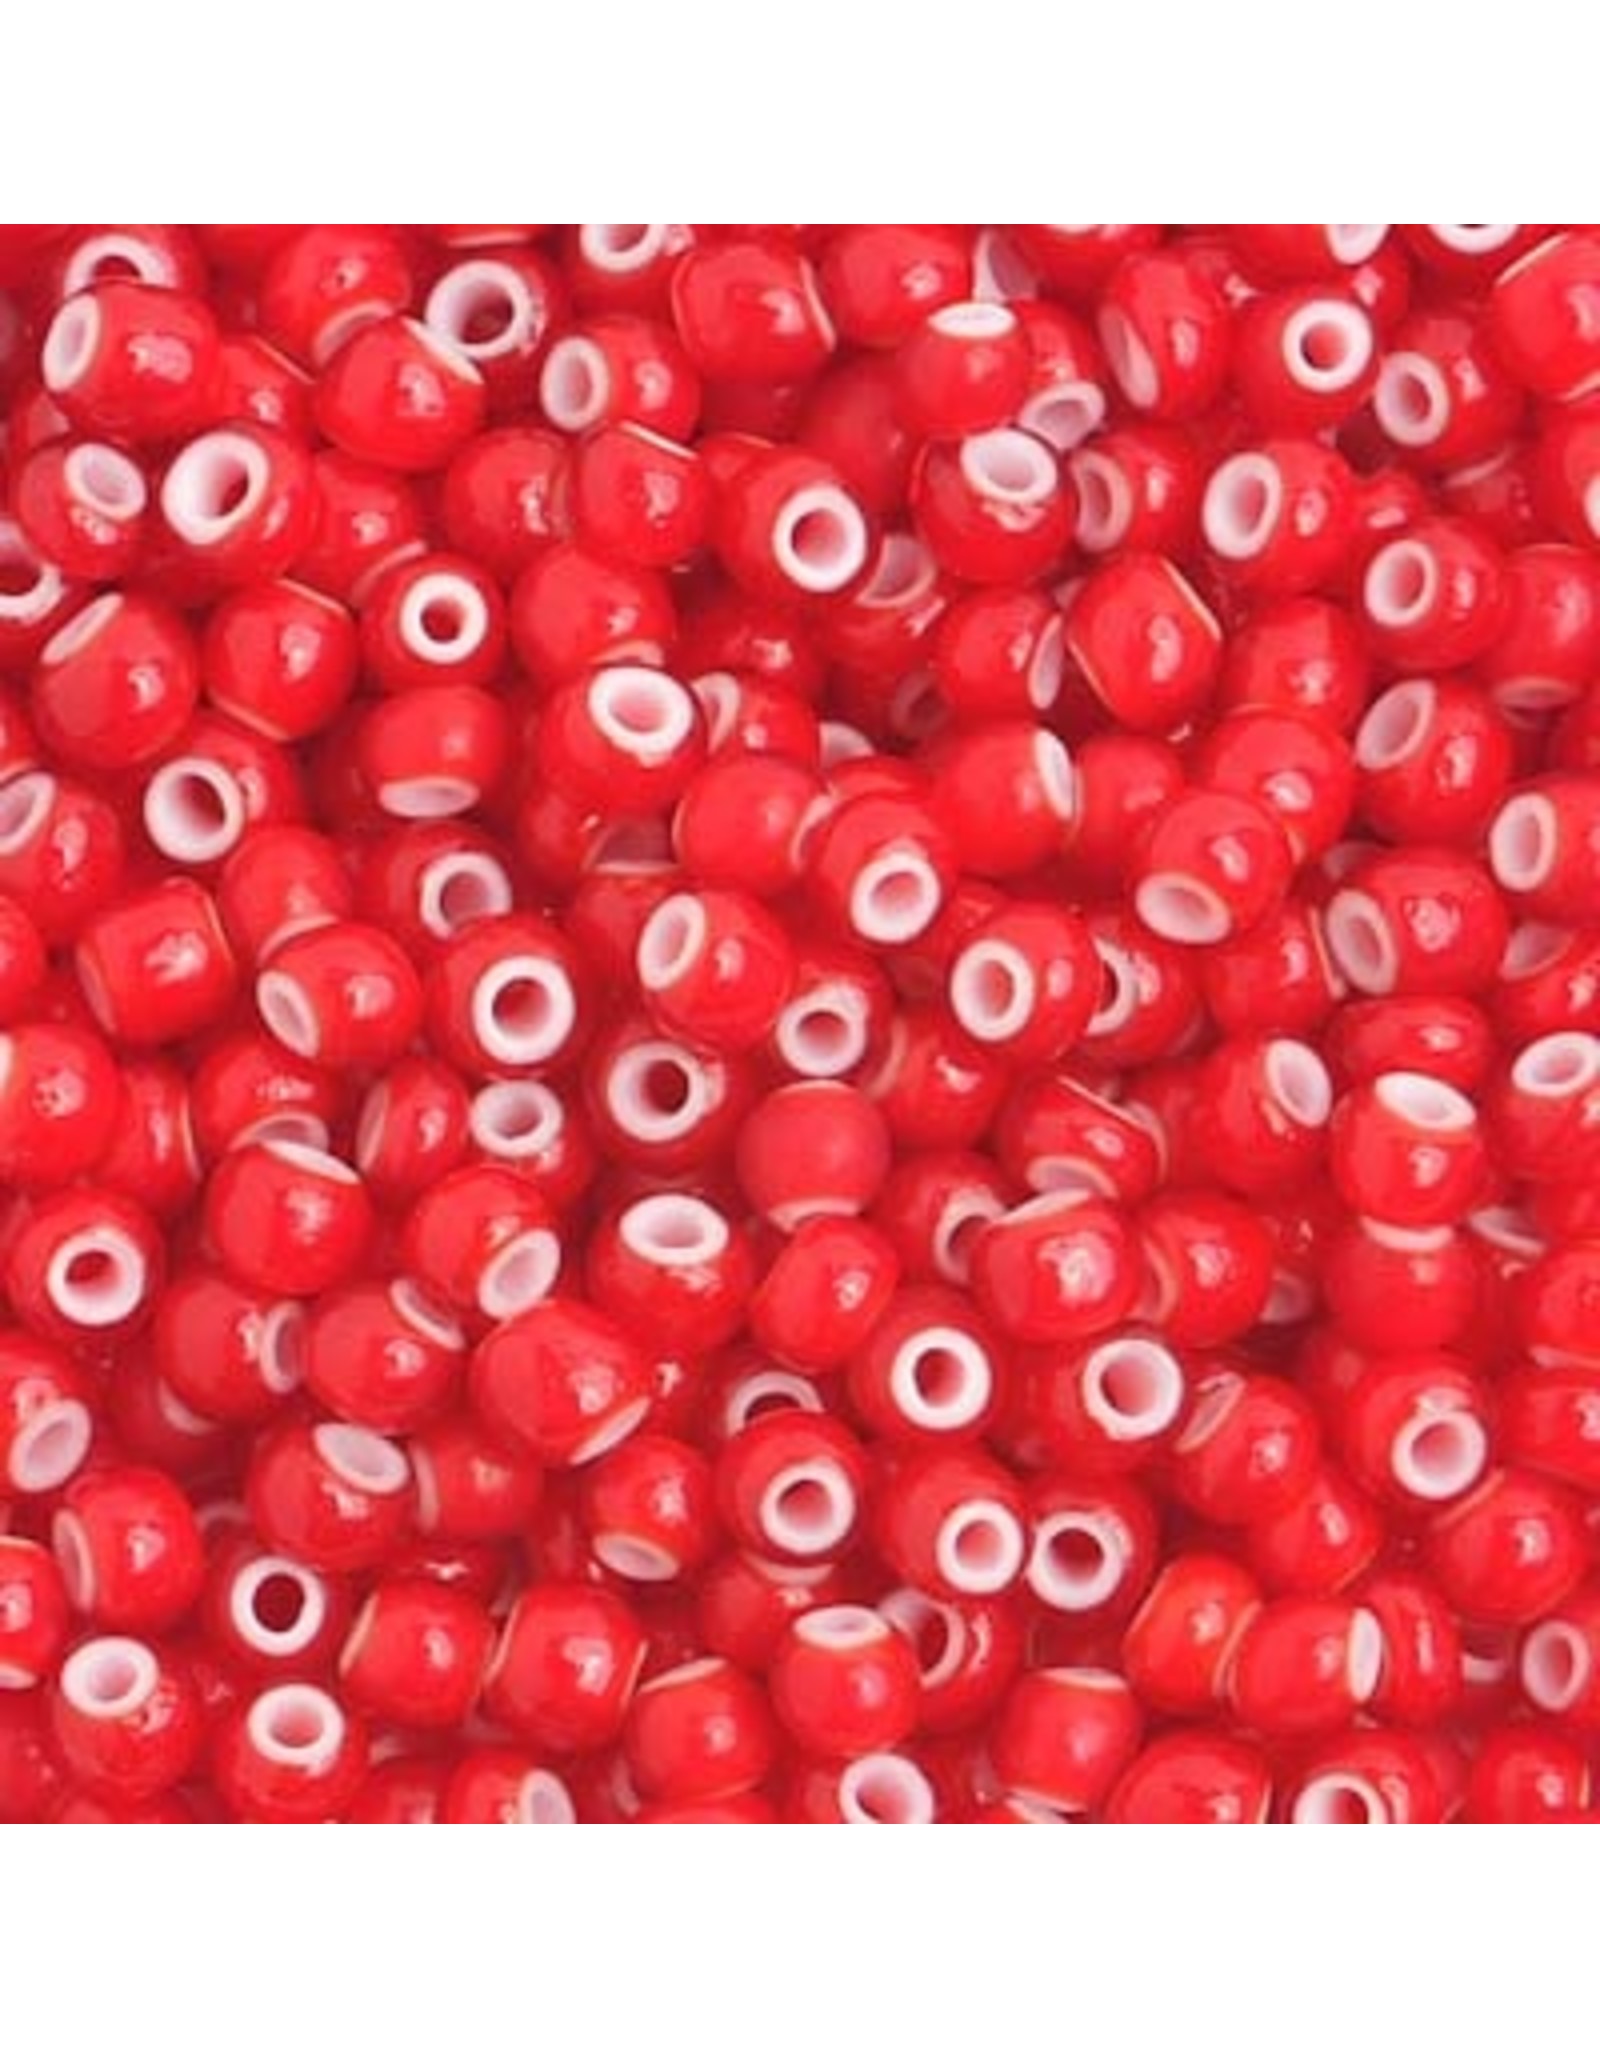 Czech *401441  6  Seed 10g  Red White Hearts